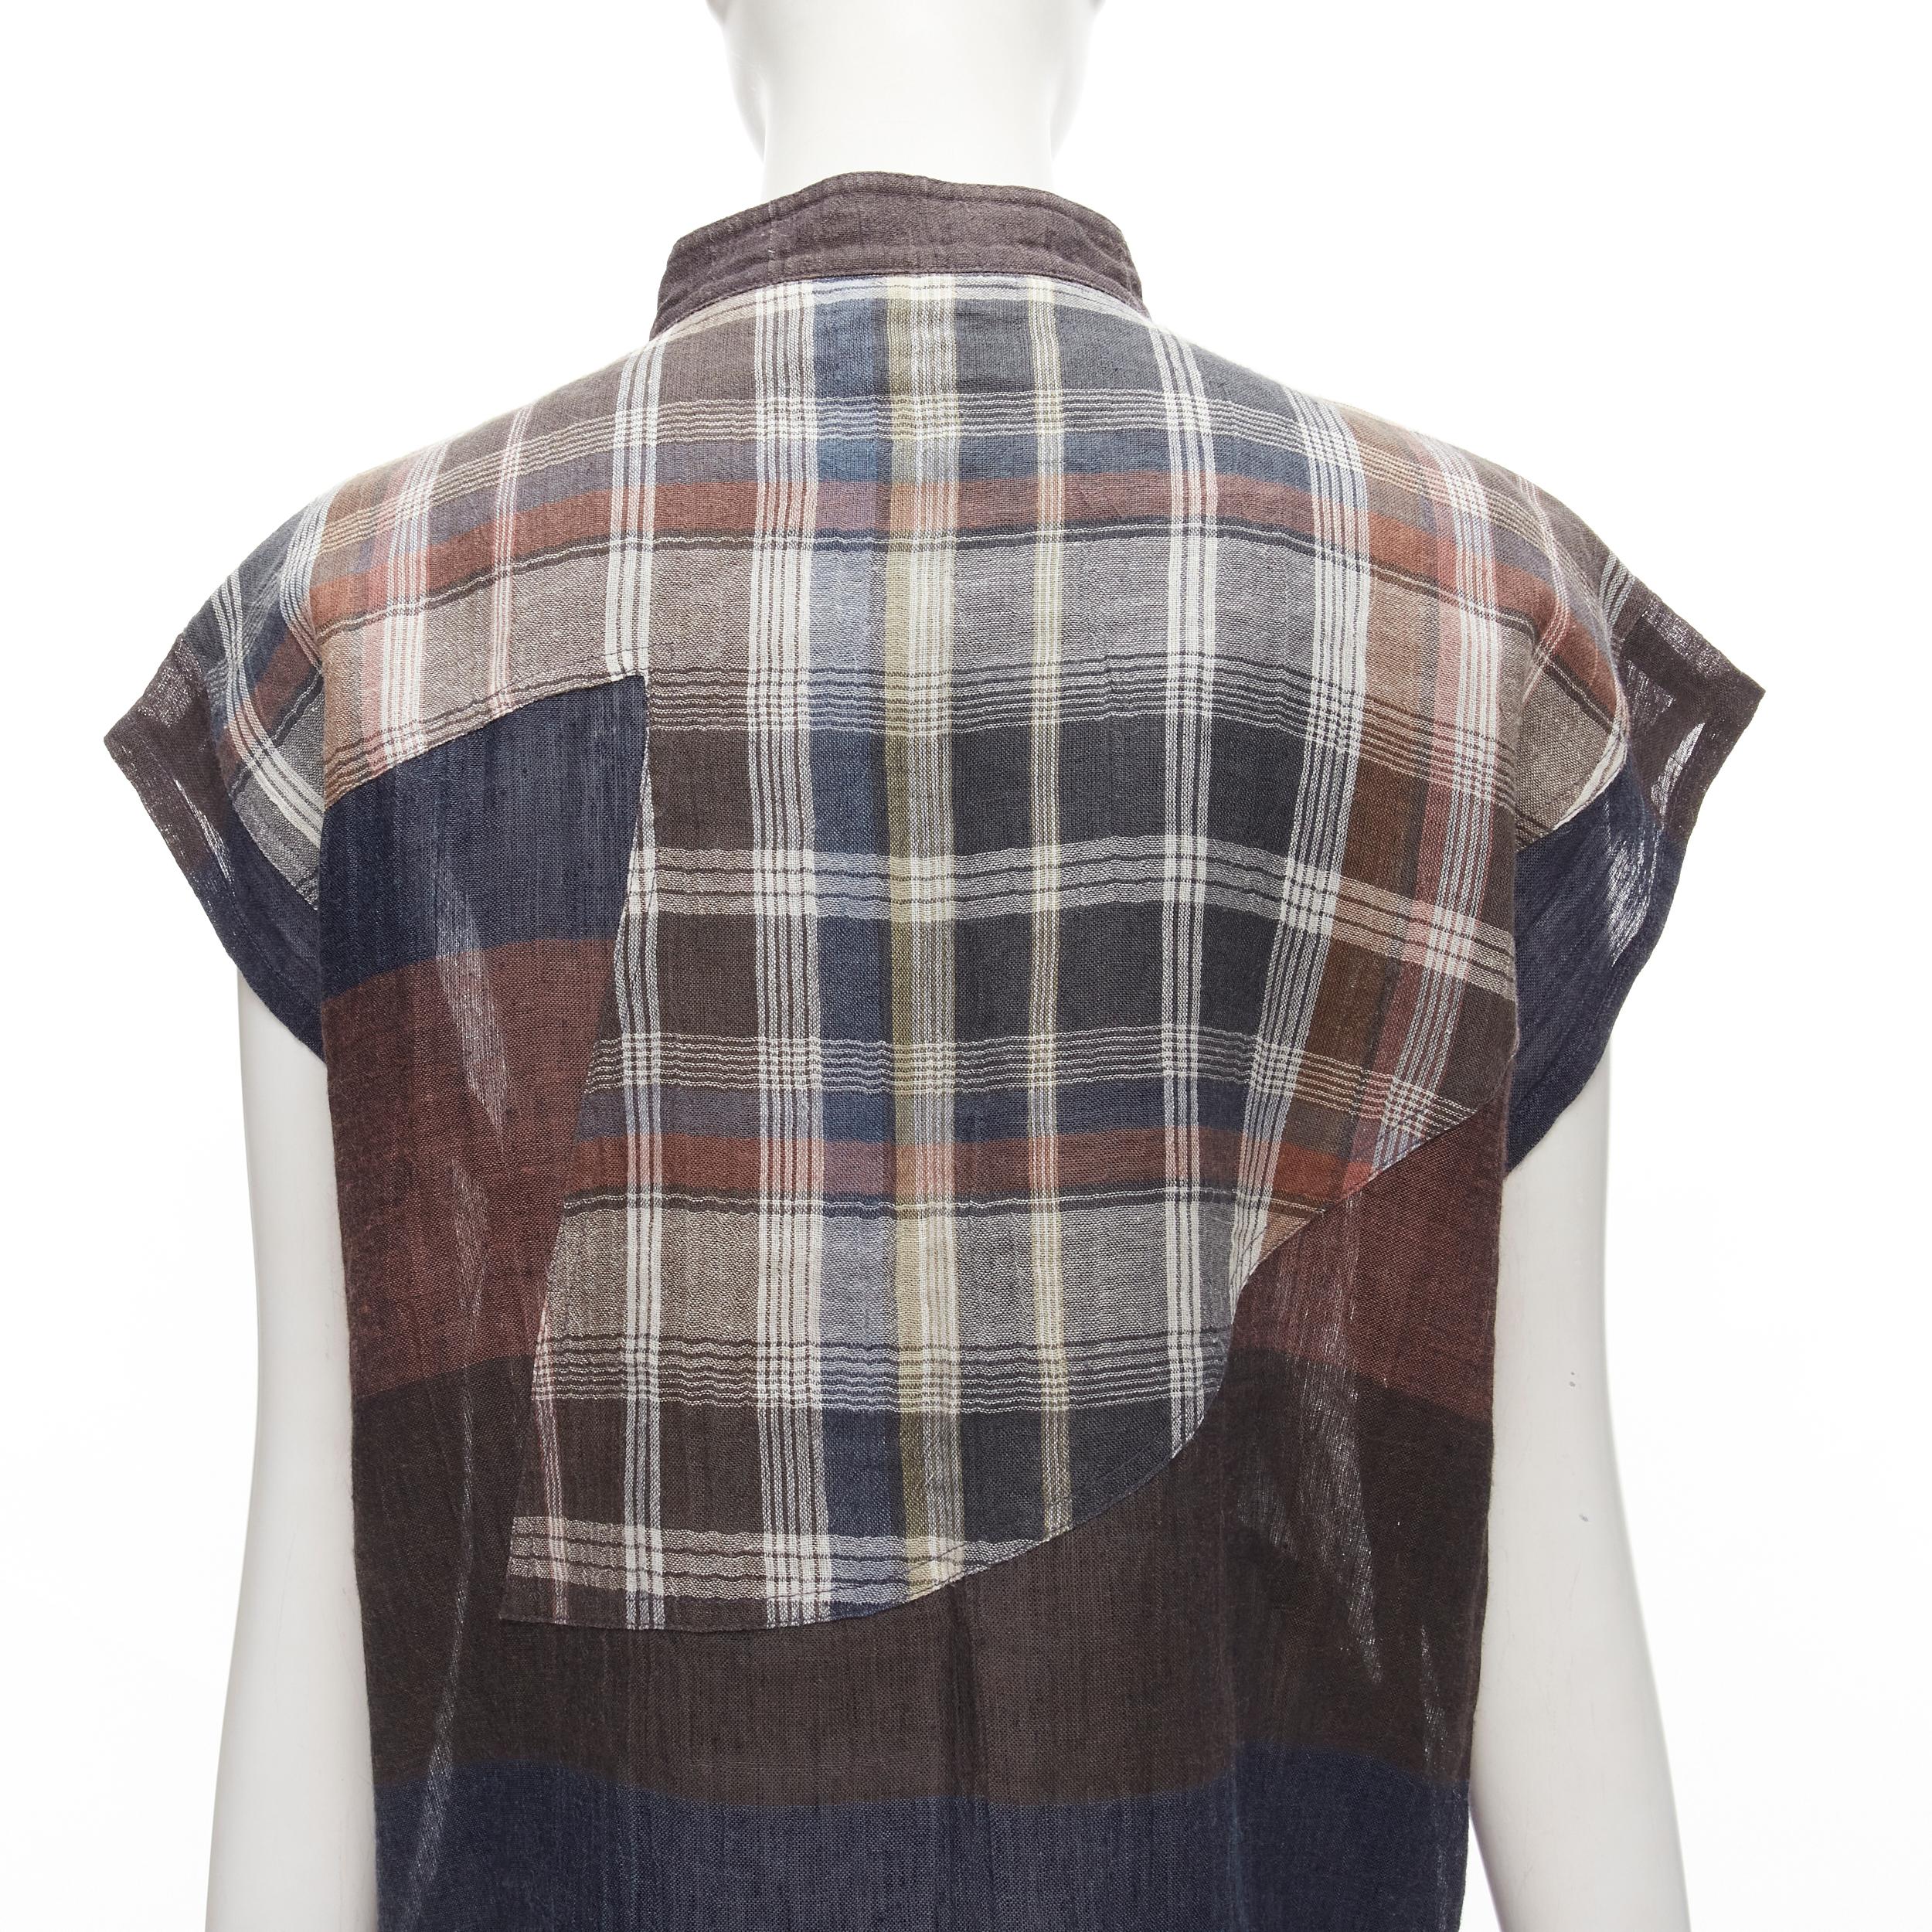 ISSEY MIYAKE 1980's Vintage brown navy stripes checked patchwork linen shirt JP9 S
Reference: TGAS/C01937
Brand: Issey Miyake
Material: Linen
Color: Brown, Blue
Pattern: Striped
Closure: Button
Extra Details: iridescent shell buttons. Check and